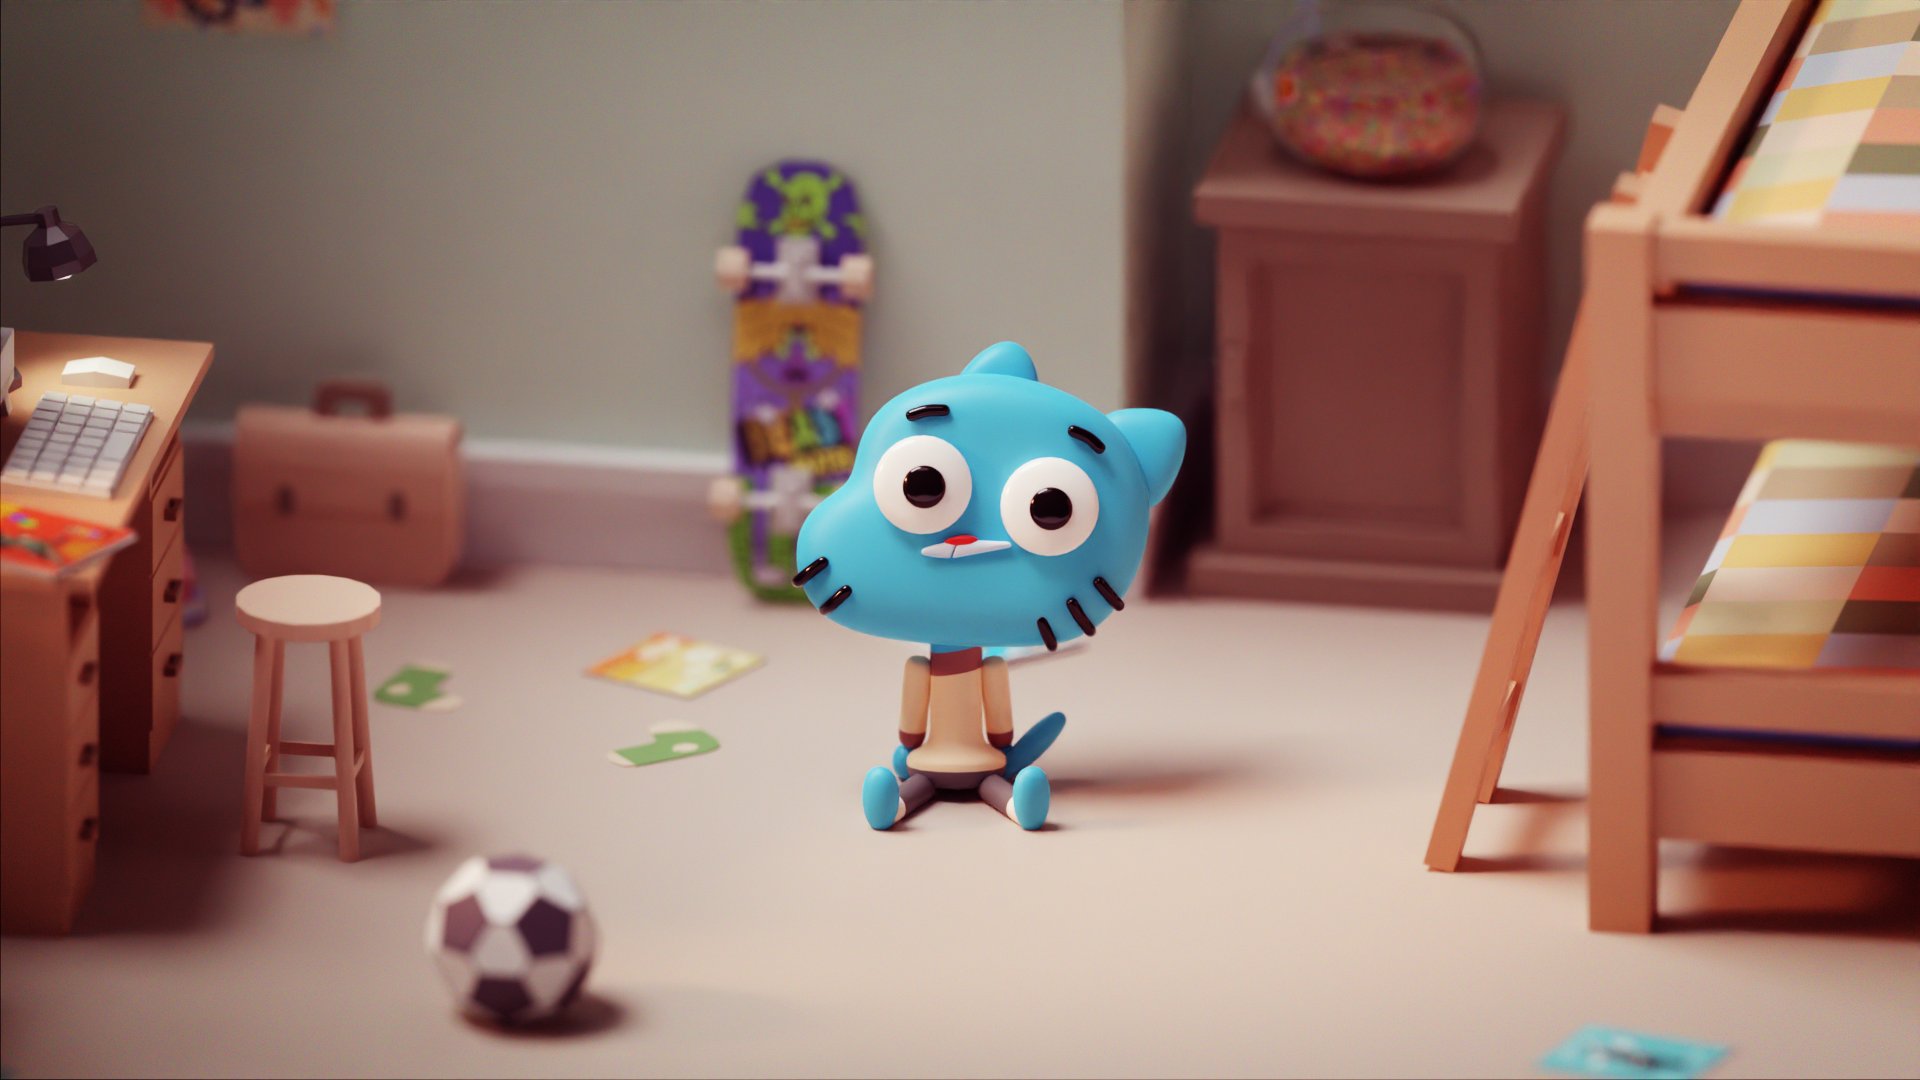 Gumball and Darwin - Finished Projects - Blender Artists Community